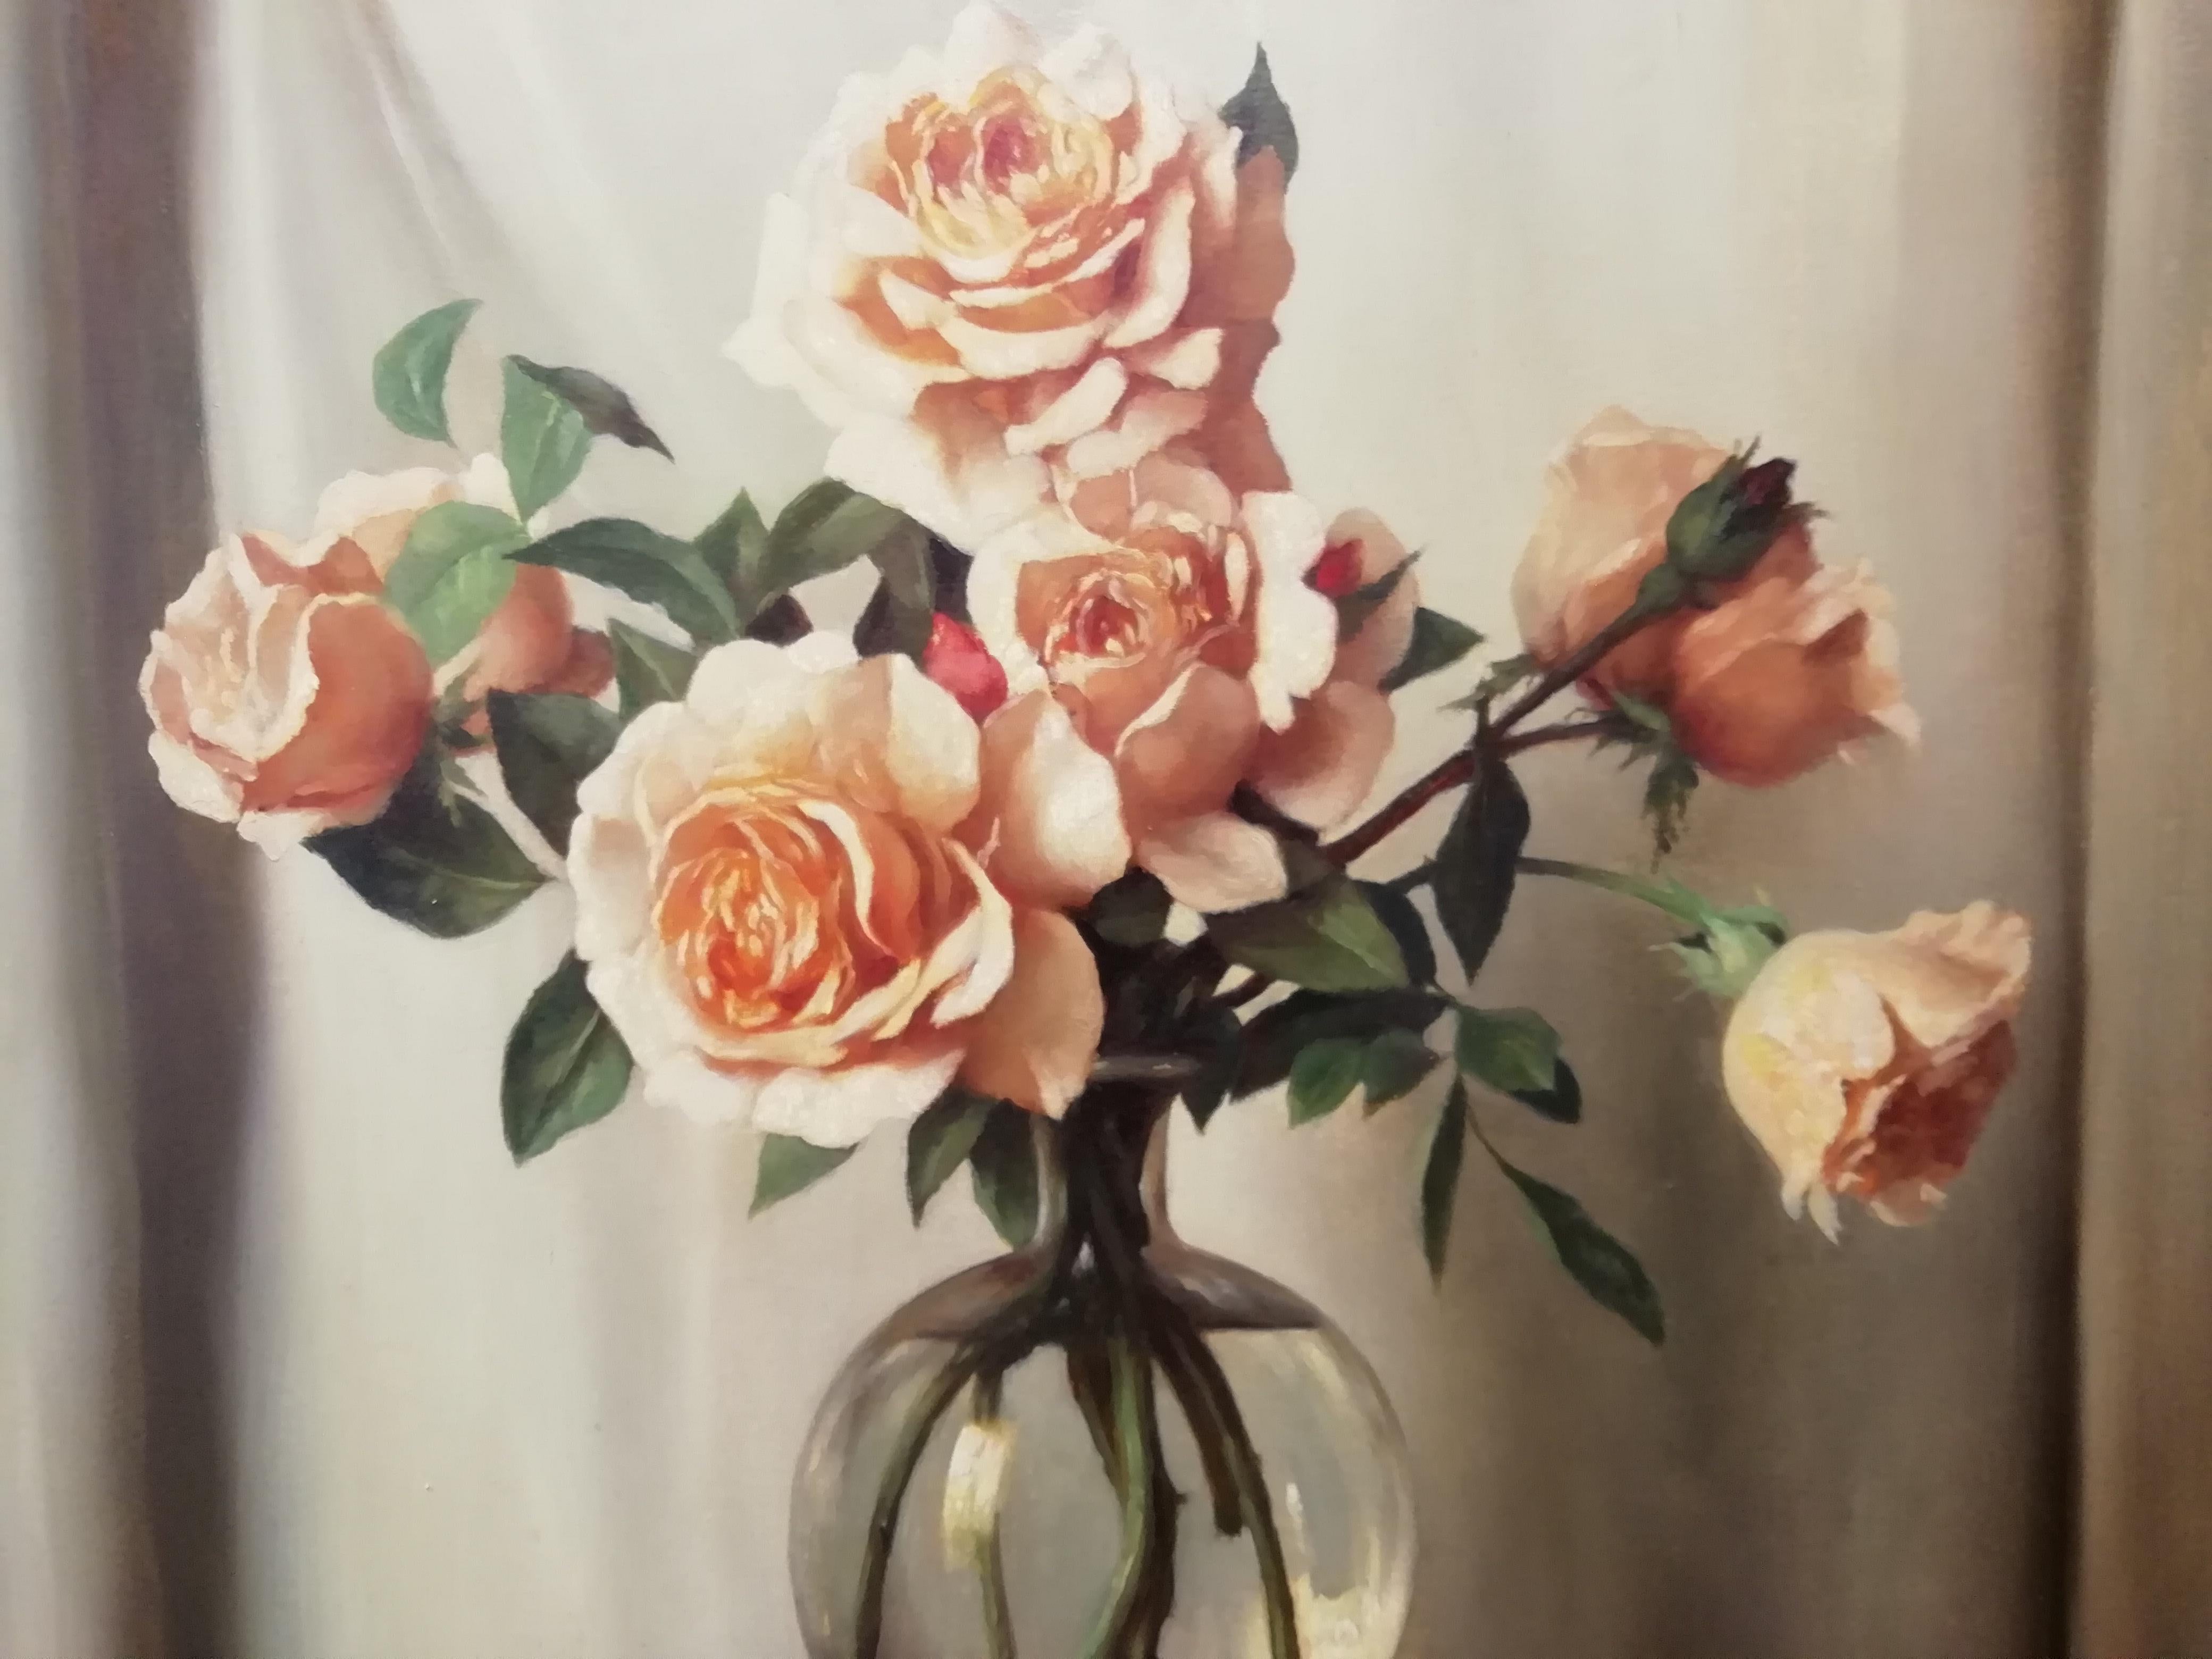 Oiled Still Life Vase of Roses and Cat, Bruno Croatto 20th Century Oil Italian Painter For Sale